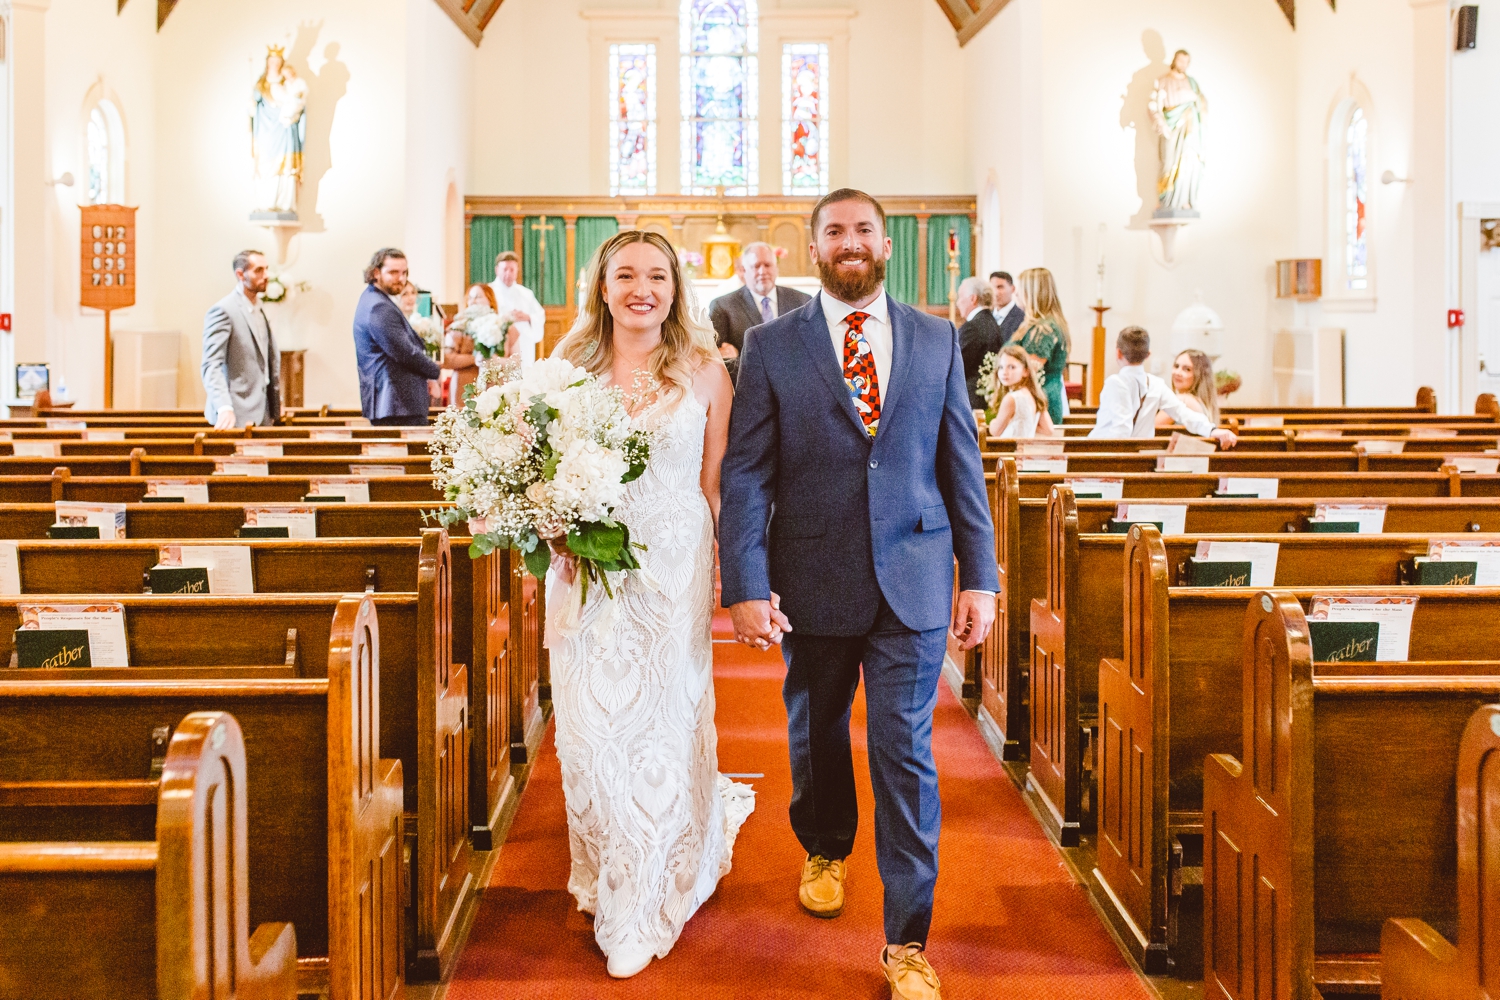 Bride and groom exiting ceremony | Brooke Michelle Photography